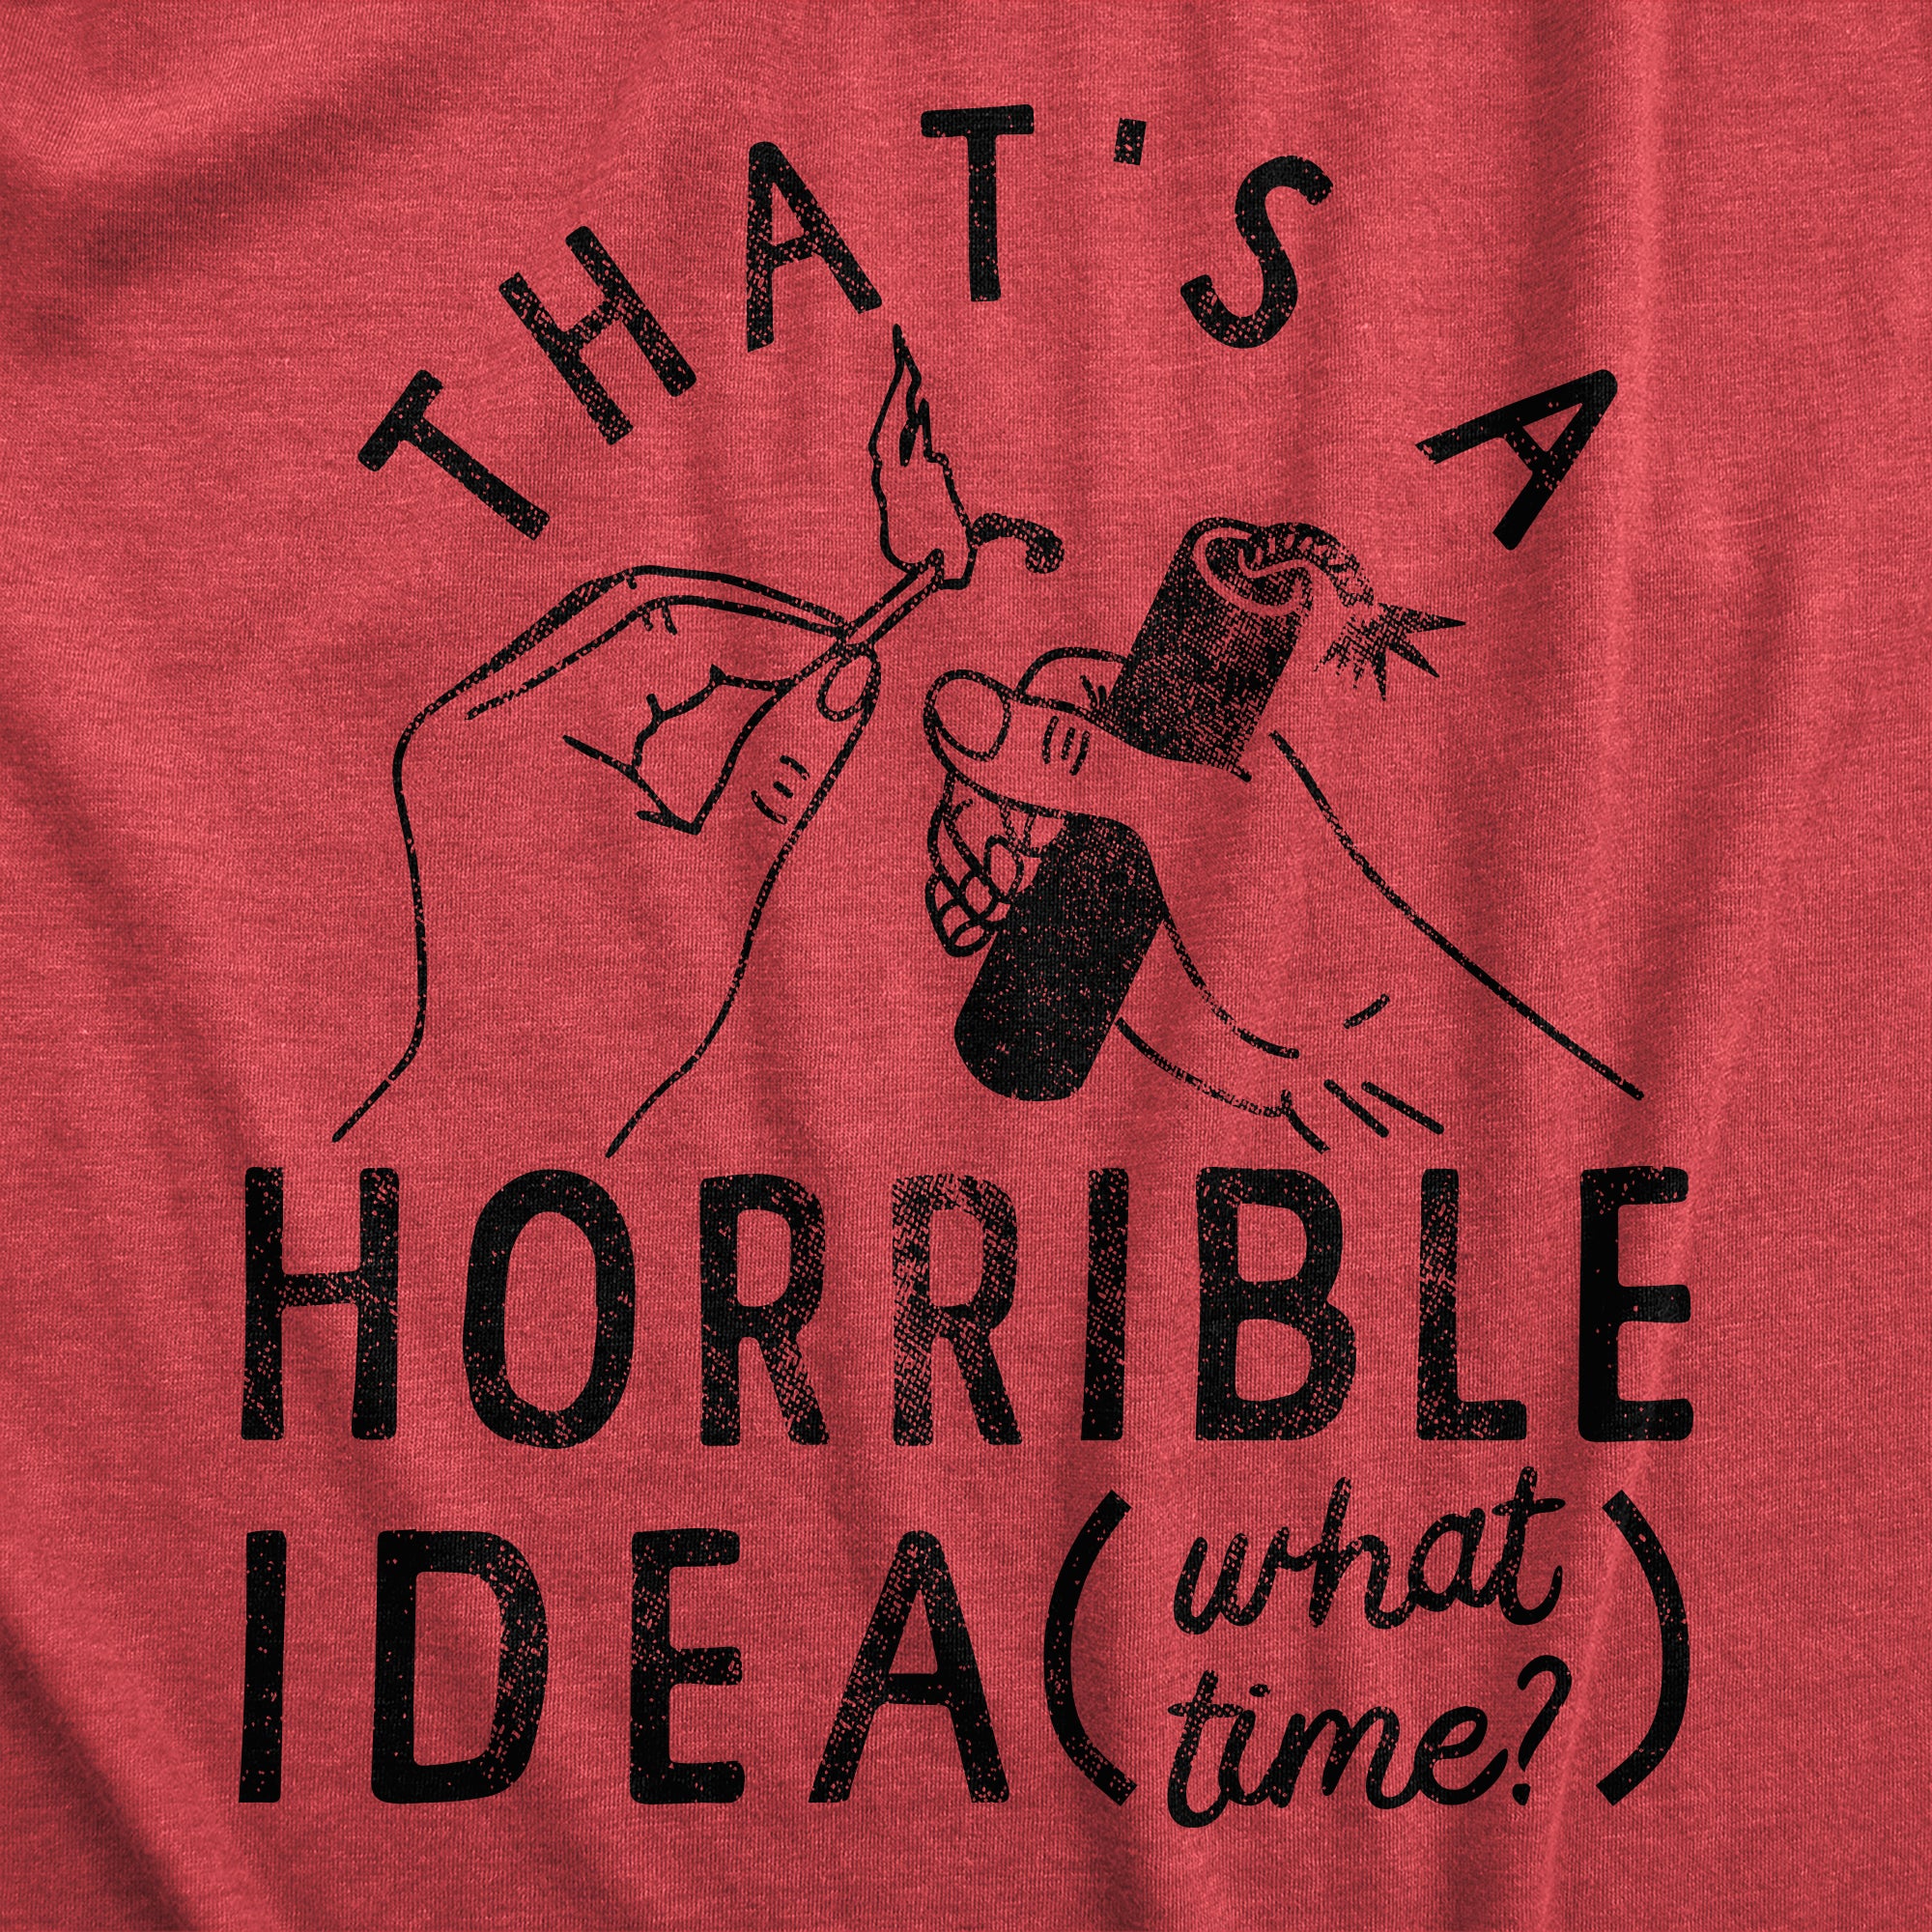 Funny Heather Red - IDEA Thats A Horrible Idea What Time Womens T Shirt Nerdy Fourth of July Sarcastic Tee